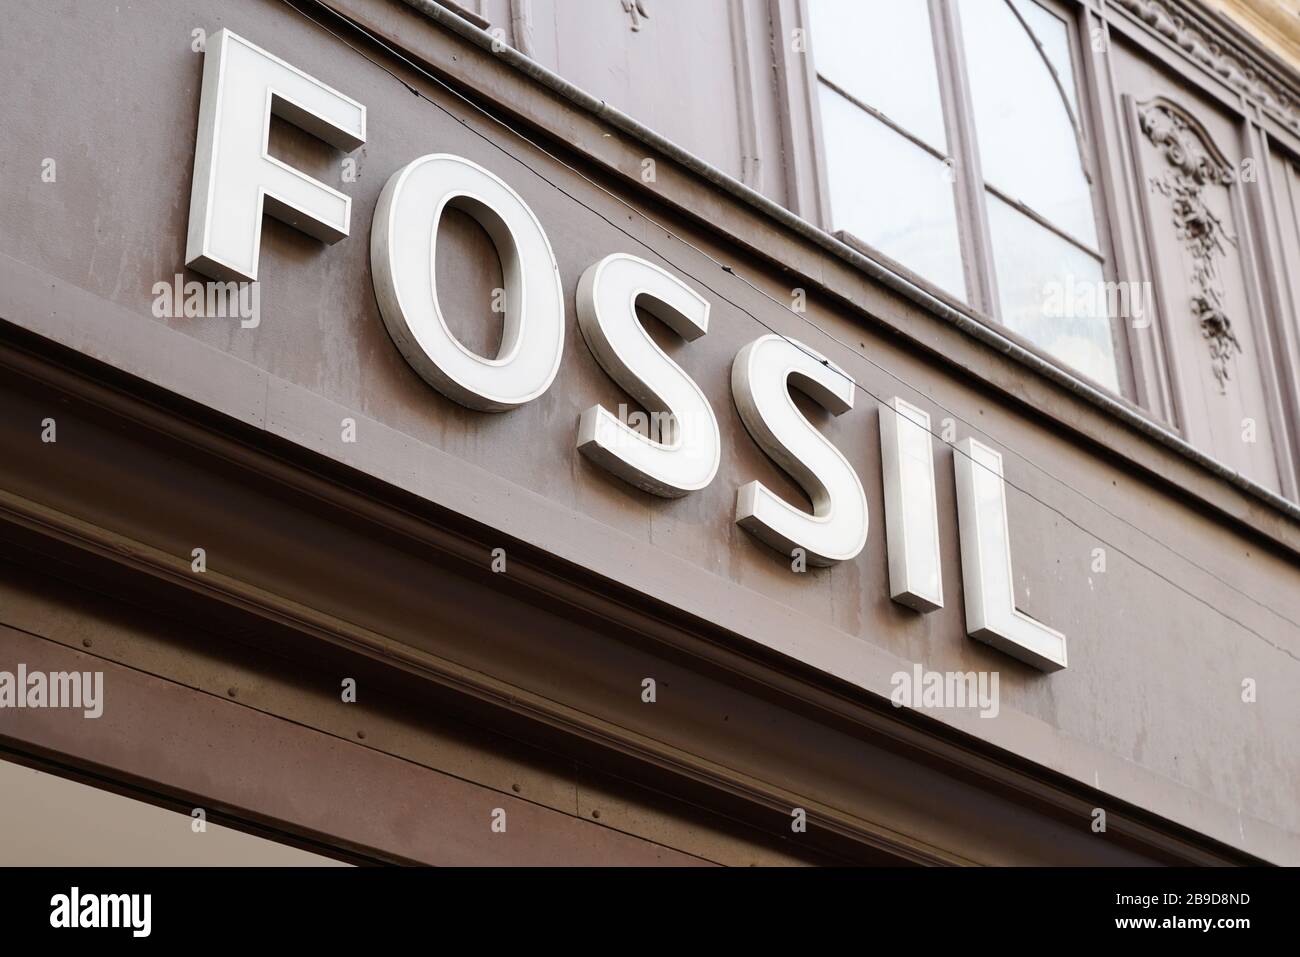 Bordeaux , Aquitaine / France - 10 30 2019 : fossil sign store maker of  clothing logo accessories shop for men and women on building Stock Photo -  Alamy